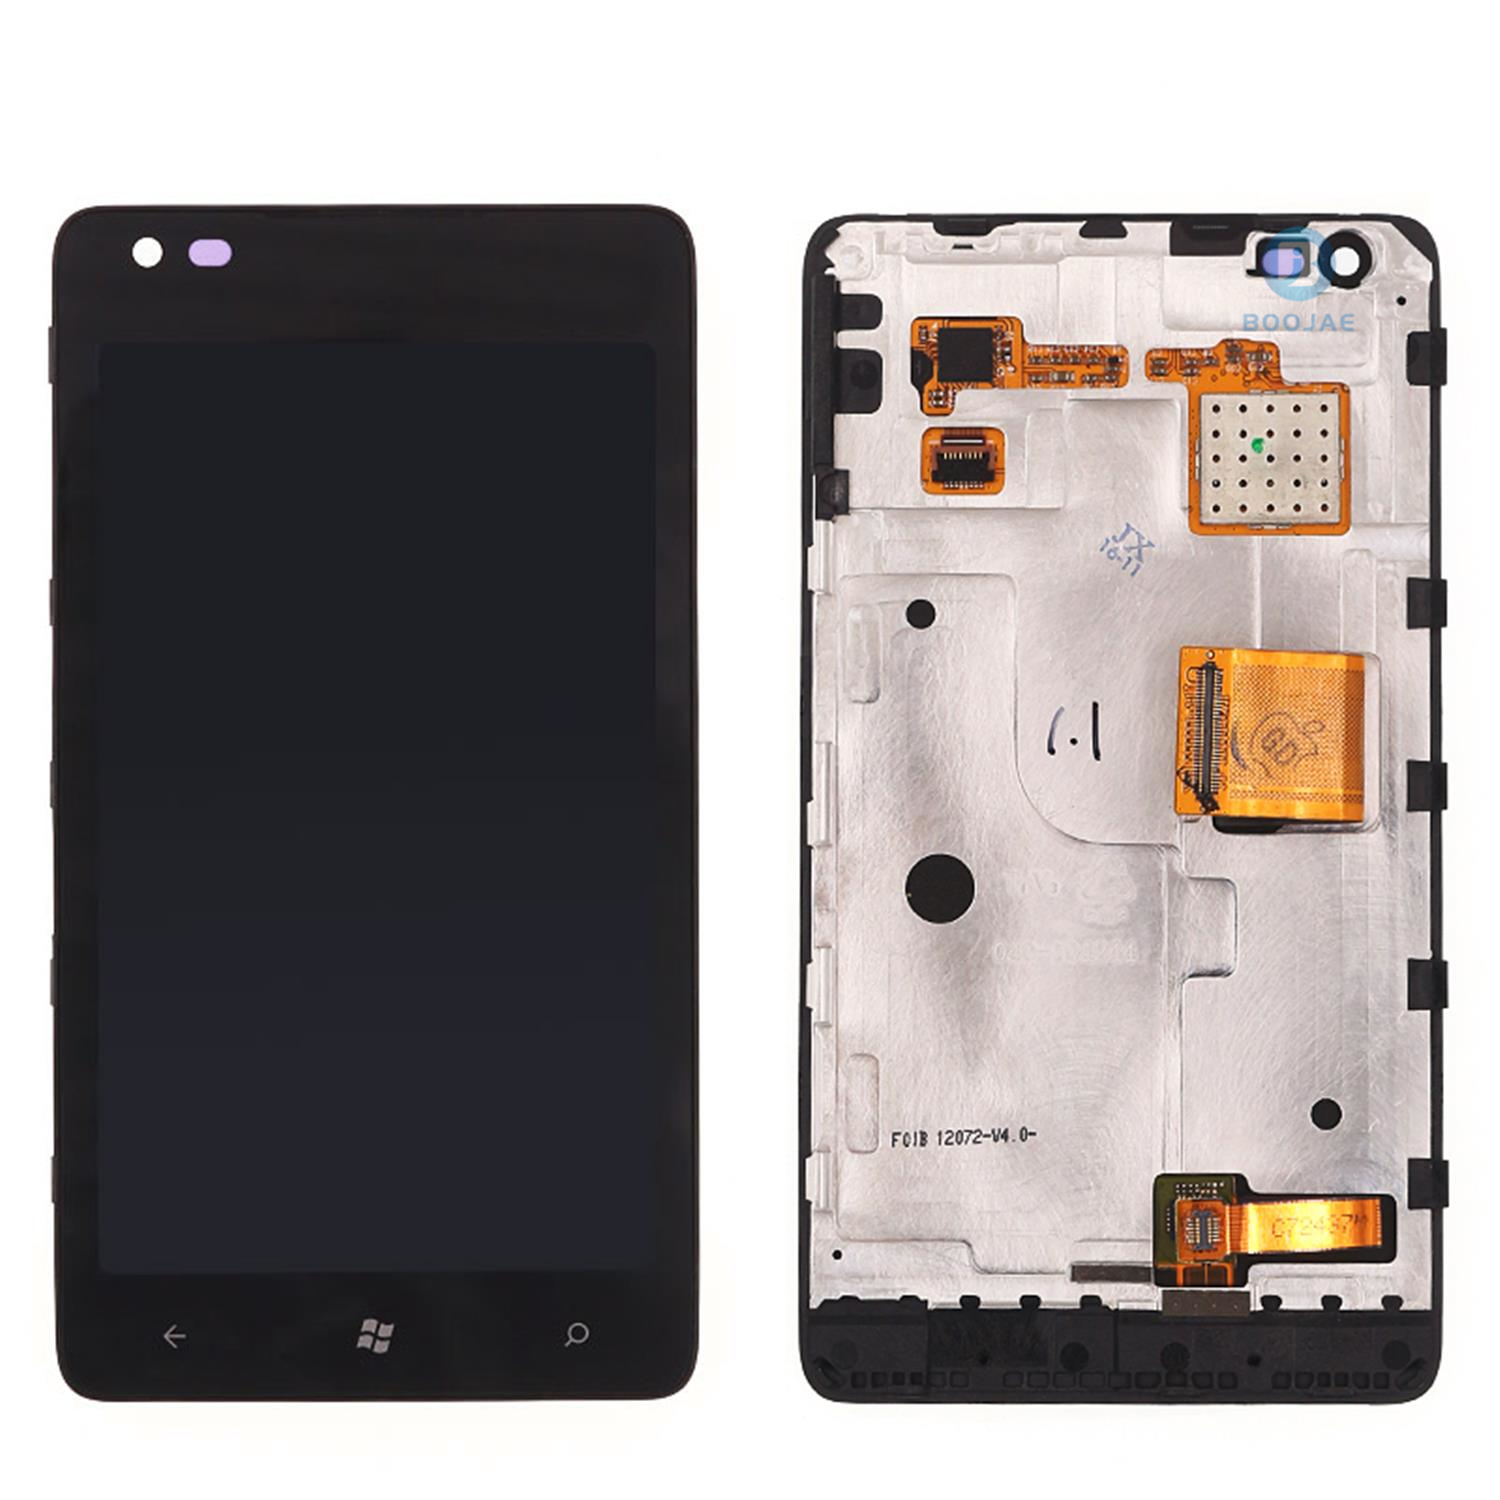 For Nokia Lumia 900 LCD Screen Display and Touch Panel Digitizer Assembly Replacement